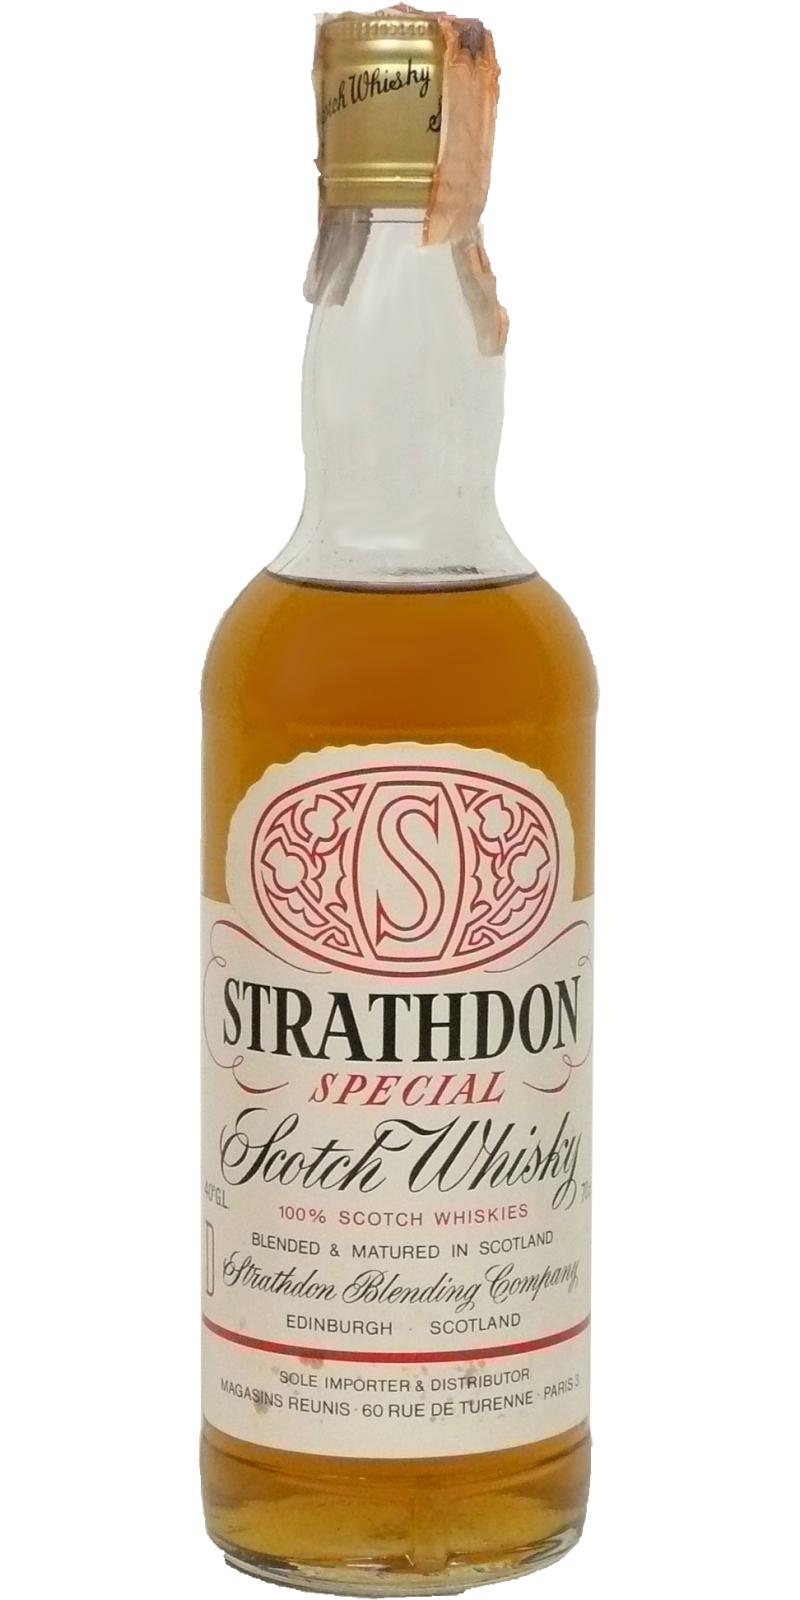 Strathdon Special Scotch Whisky